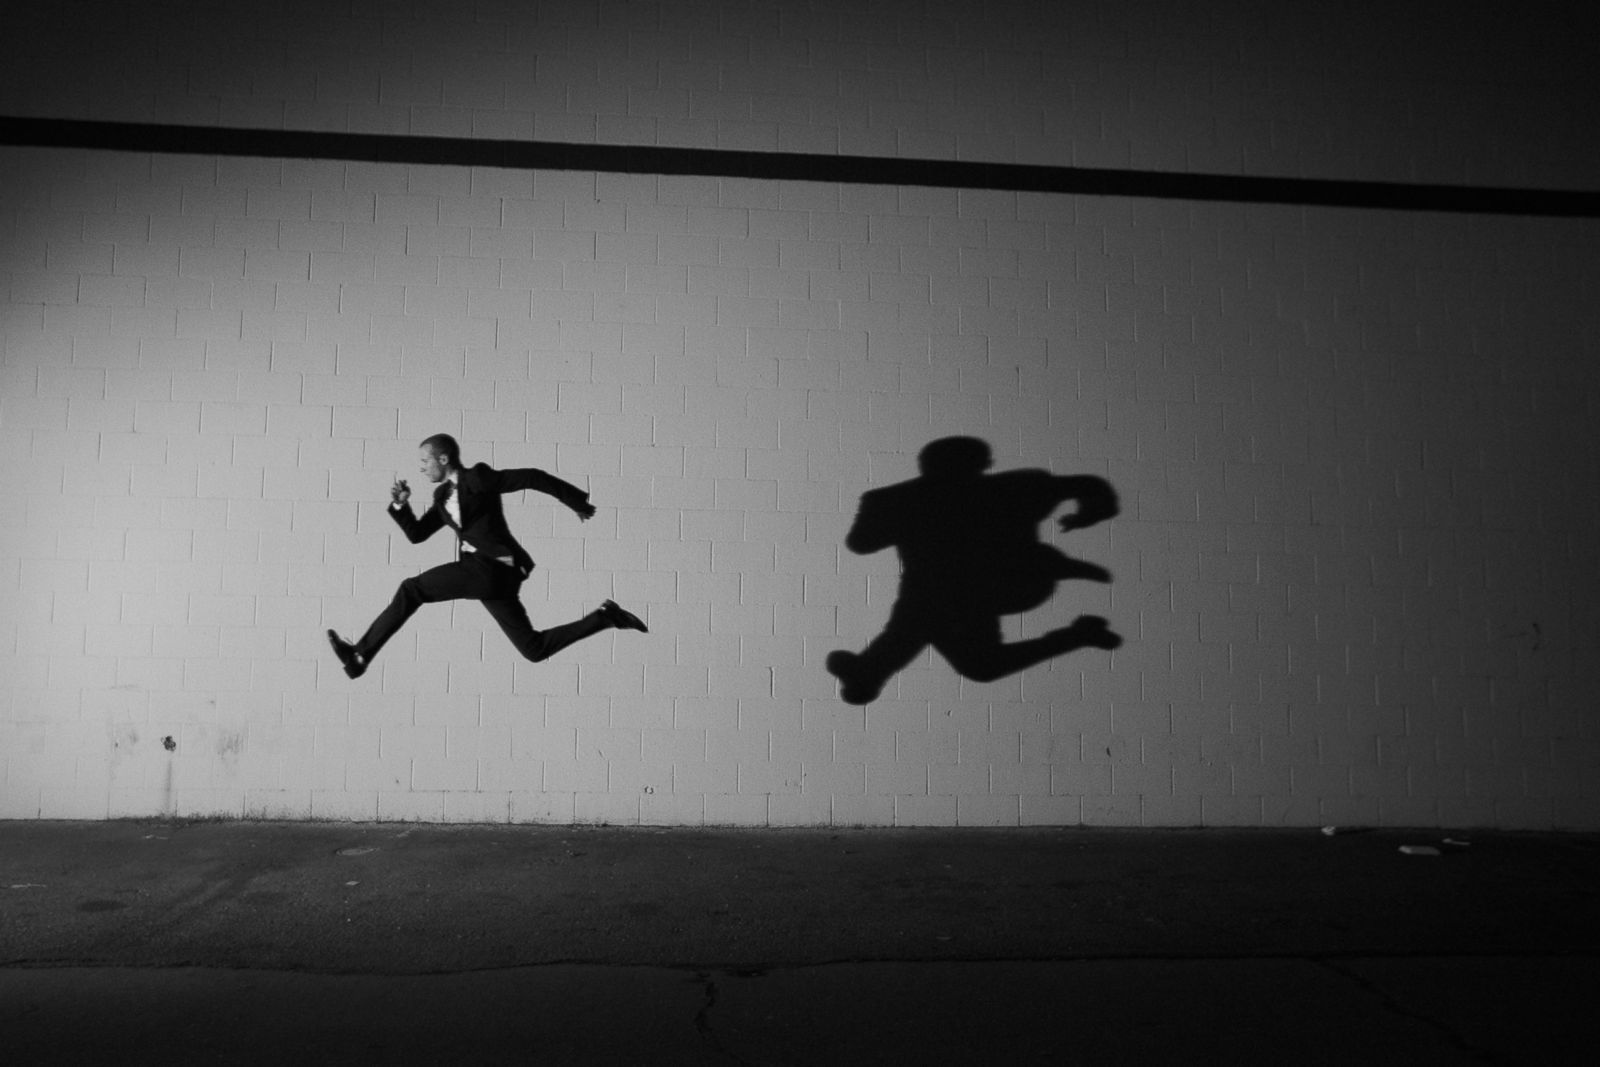 View "Running with Shadows" pictures and other Thrilling Photos C...